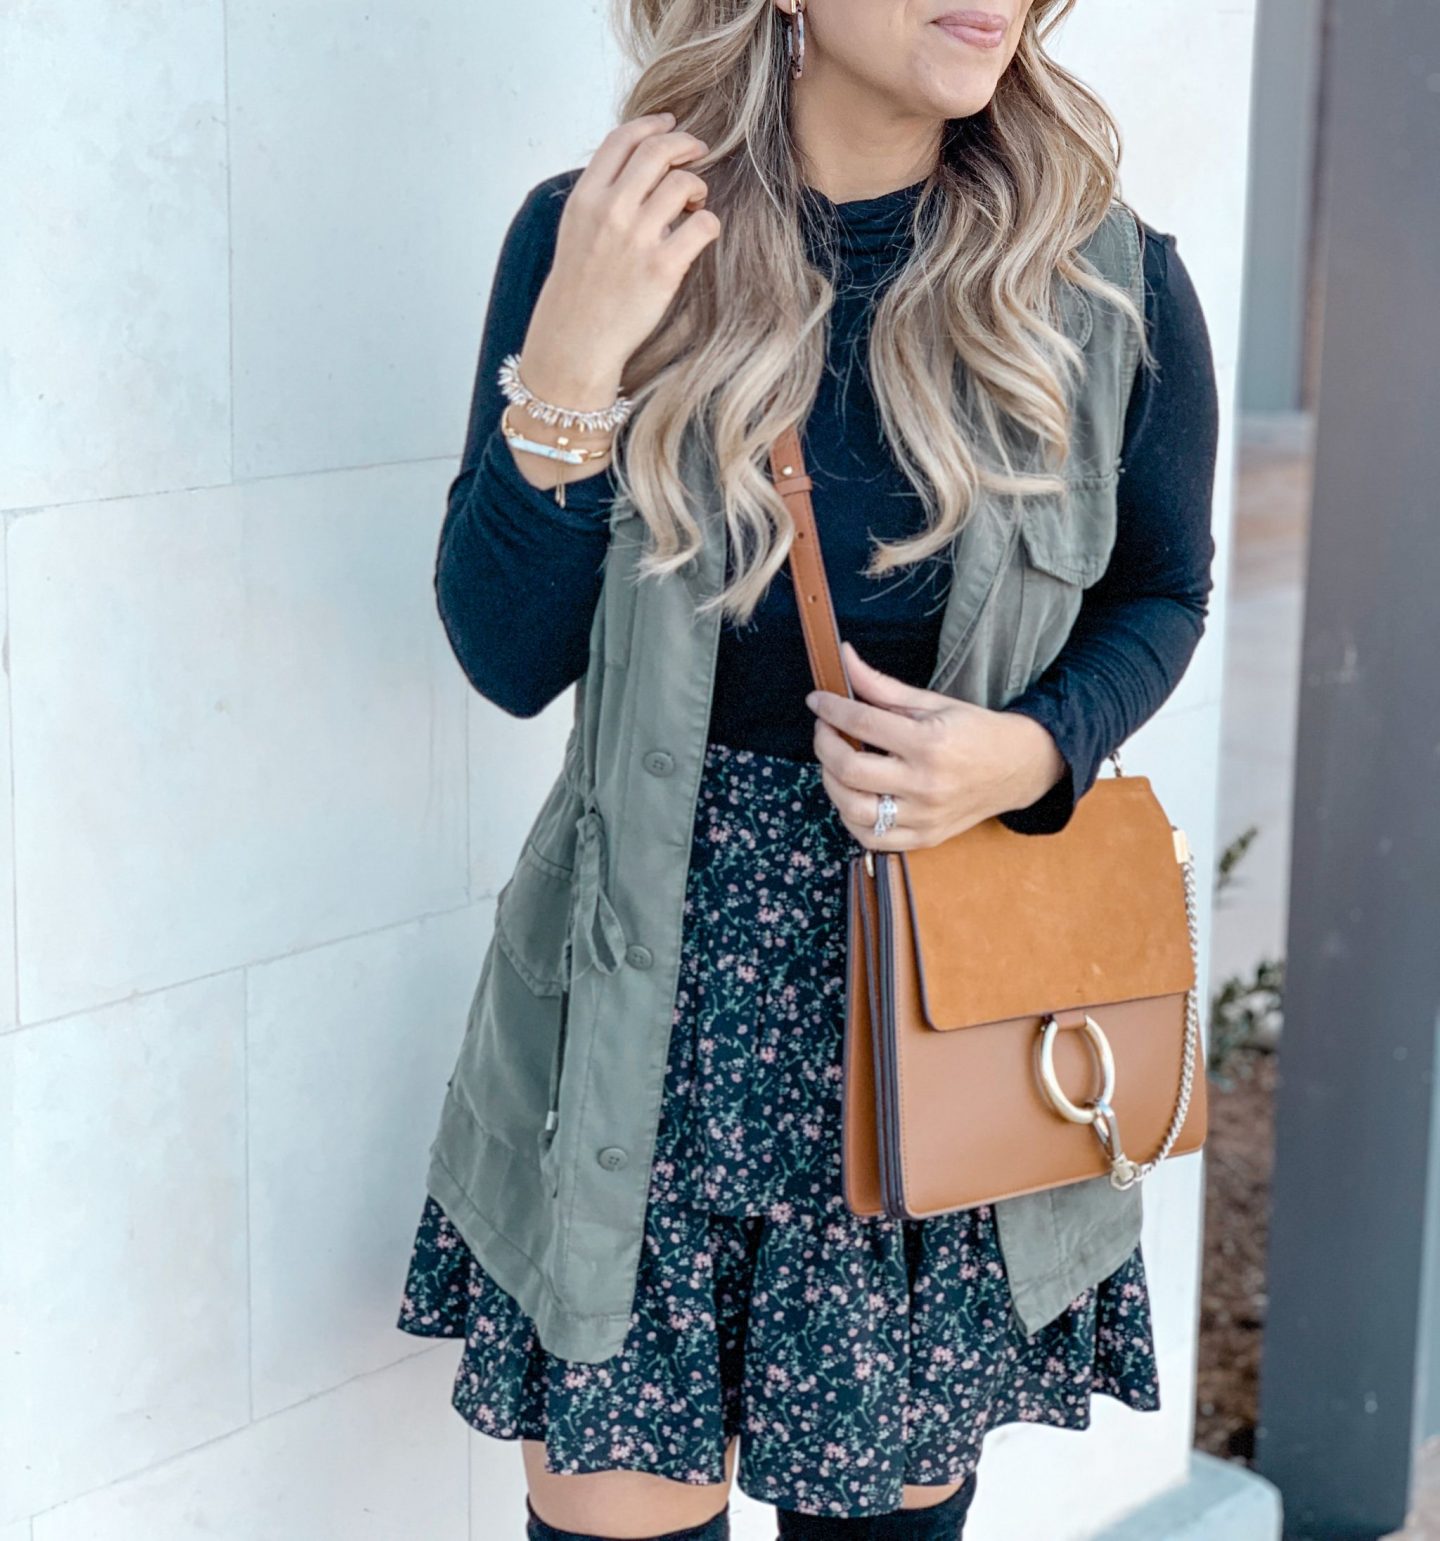 How To Style A Ruffle Skirt, Over The Knee Boots, Black Knot Headband, Chloe Faye Bag, Look for Less, Green Utility Vest, Stella & Dot 